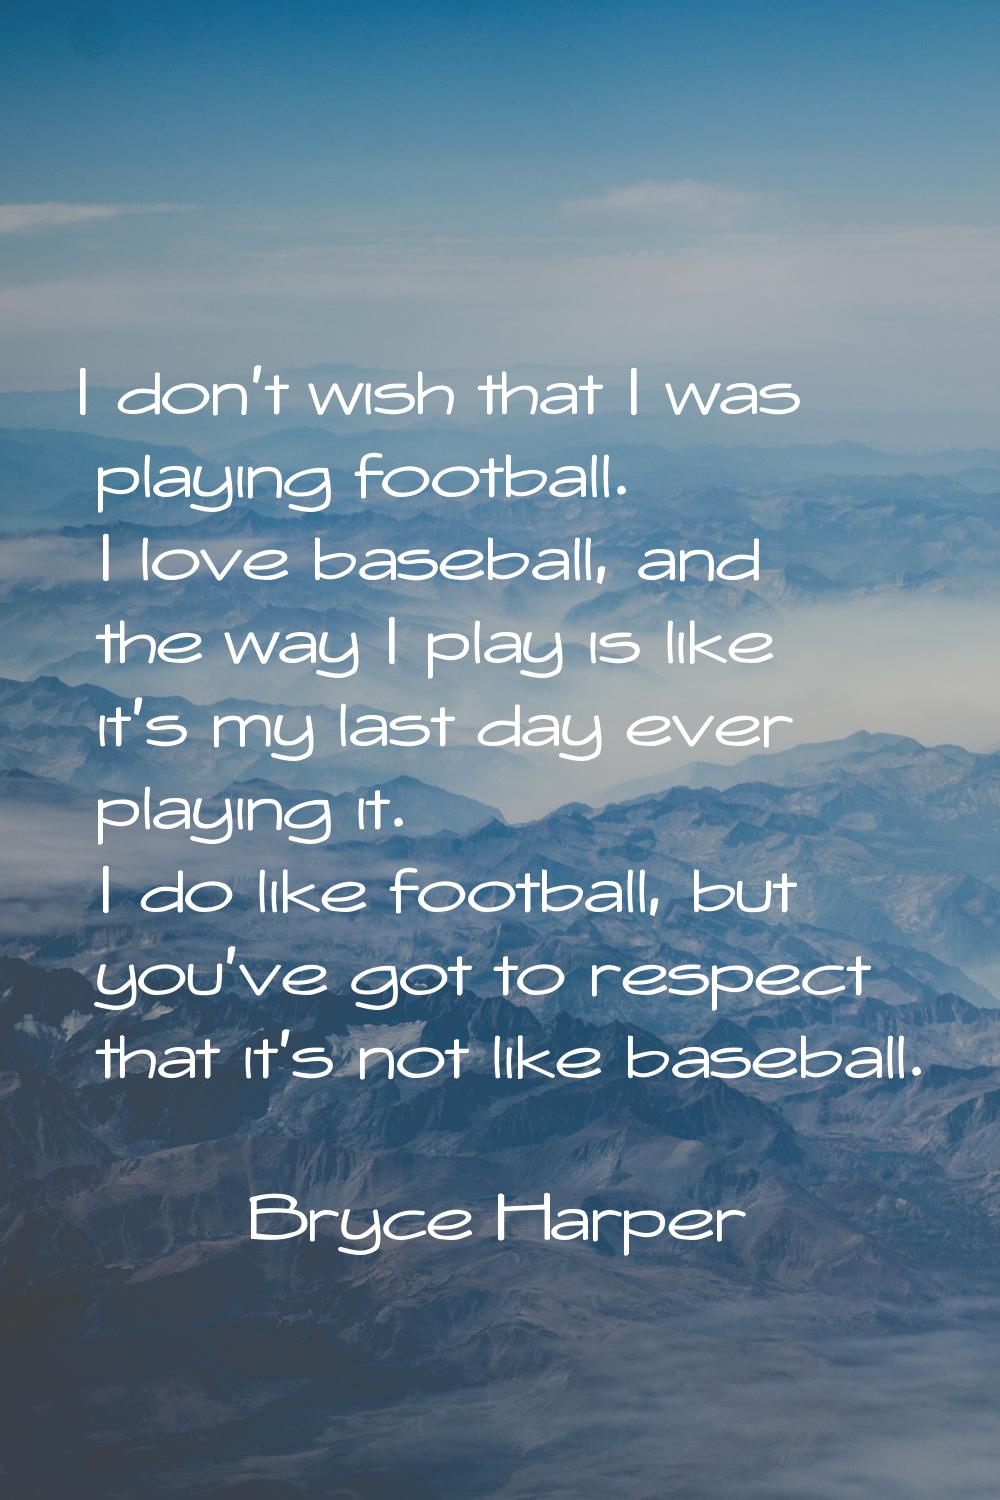 I don't wish that I was playing football. I love baseball, and the way I play is like it's my last 